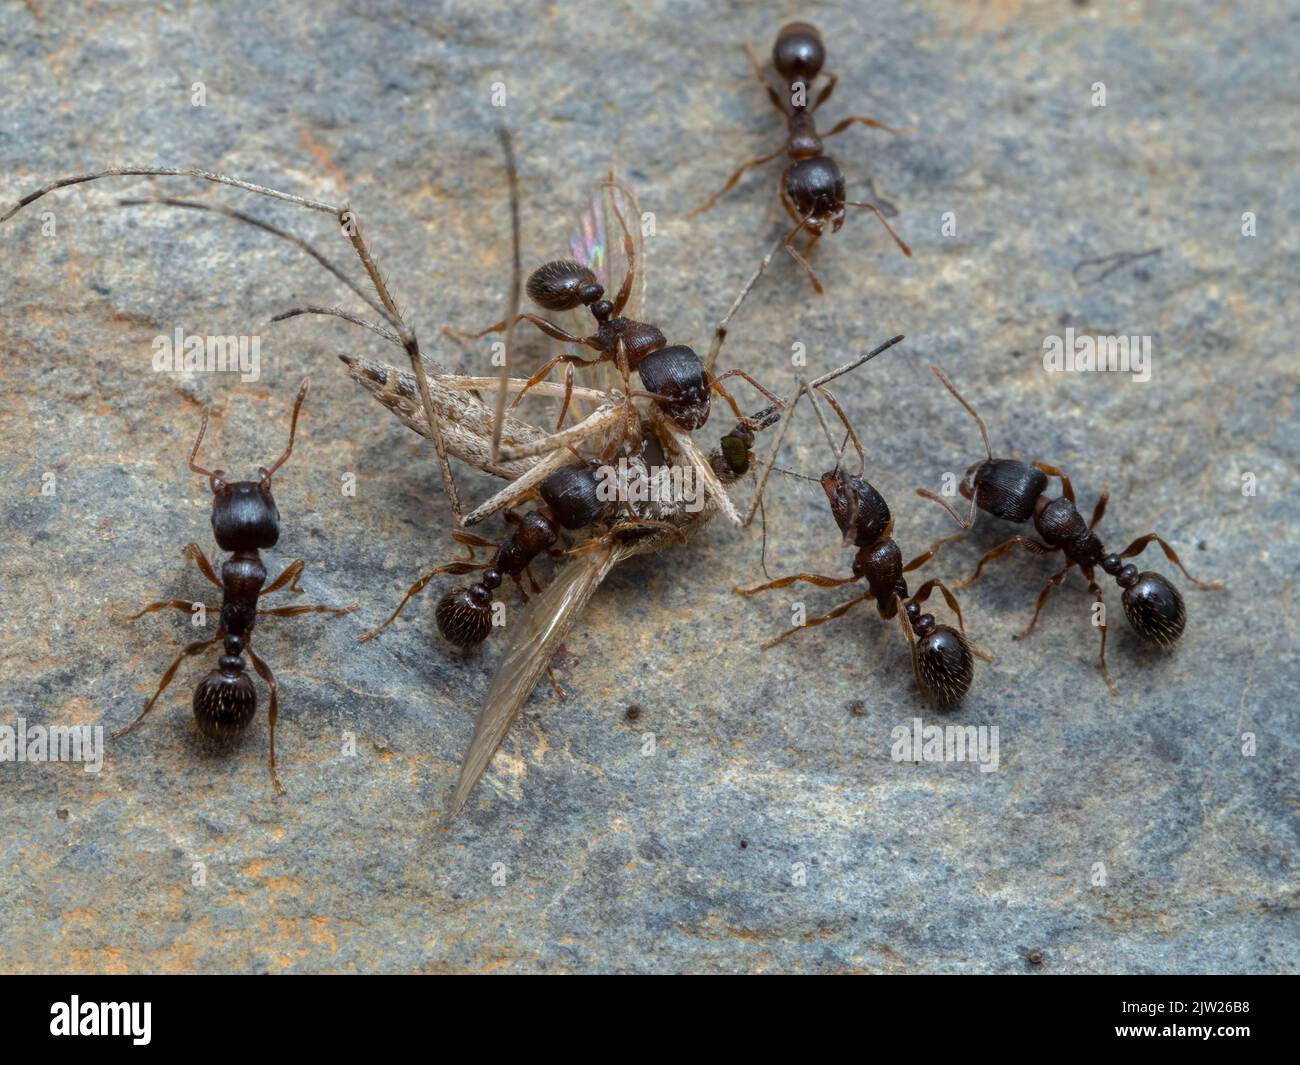 tiny pavement ants (Tetramorium immigrans) dismembering a mosquito (Aedes species) Stock Photo